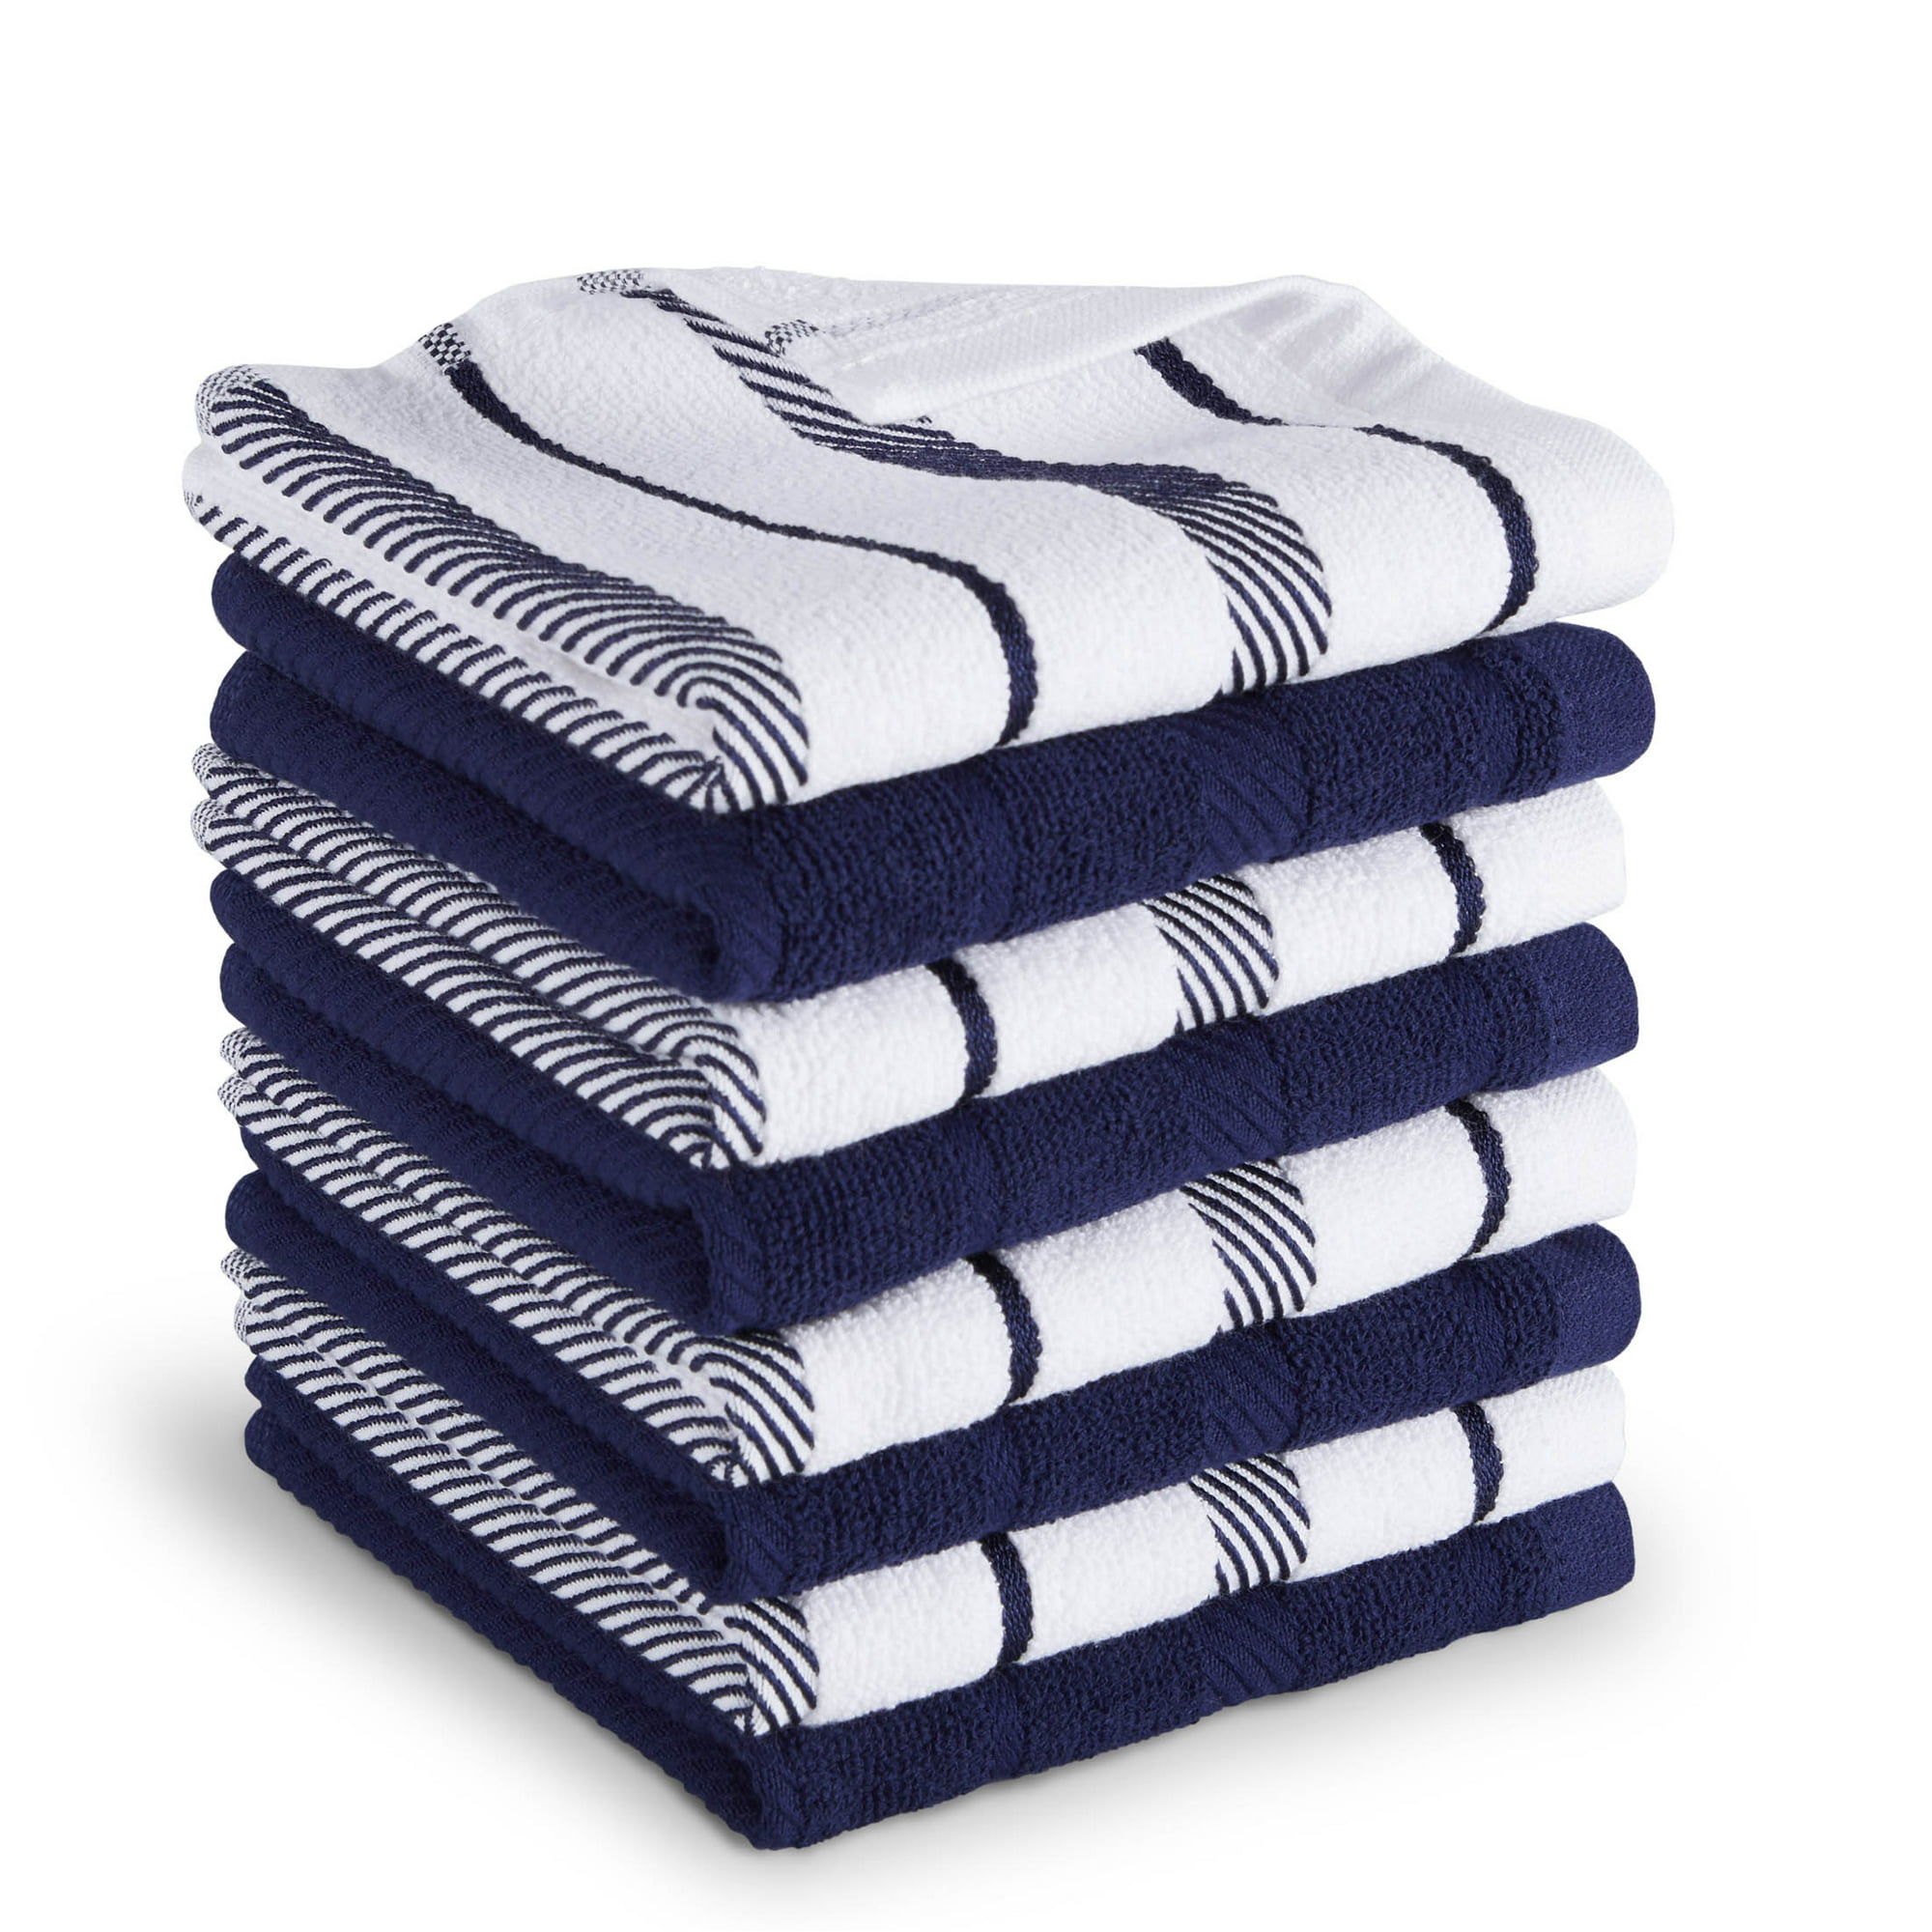 8-Pack 12"x12" KitchenAid Albany Dishcloth (various colors) from $9.80 + Free S&H w/ Walmart+ or on $35+ @ Walmart